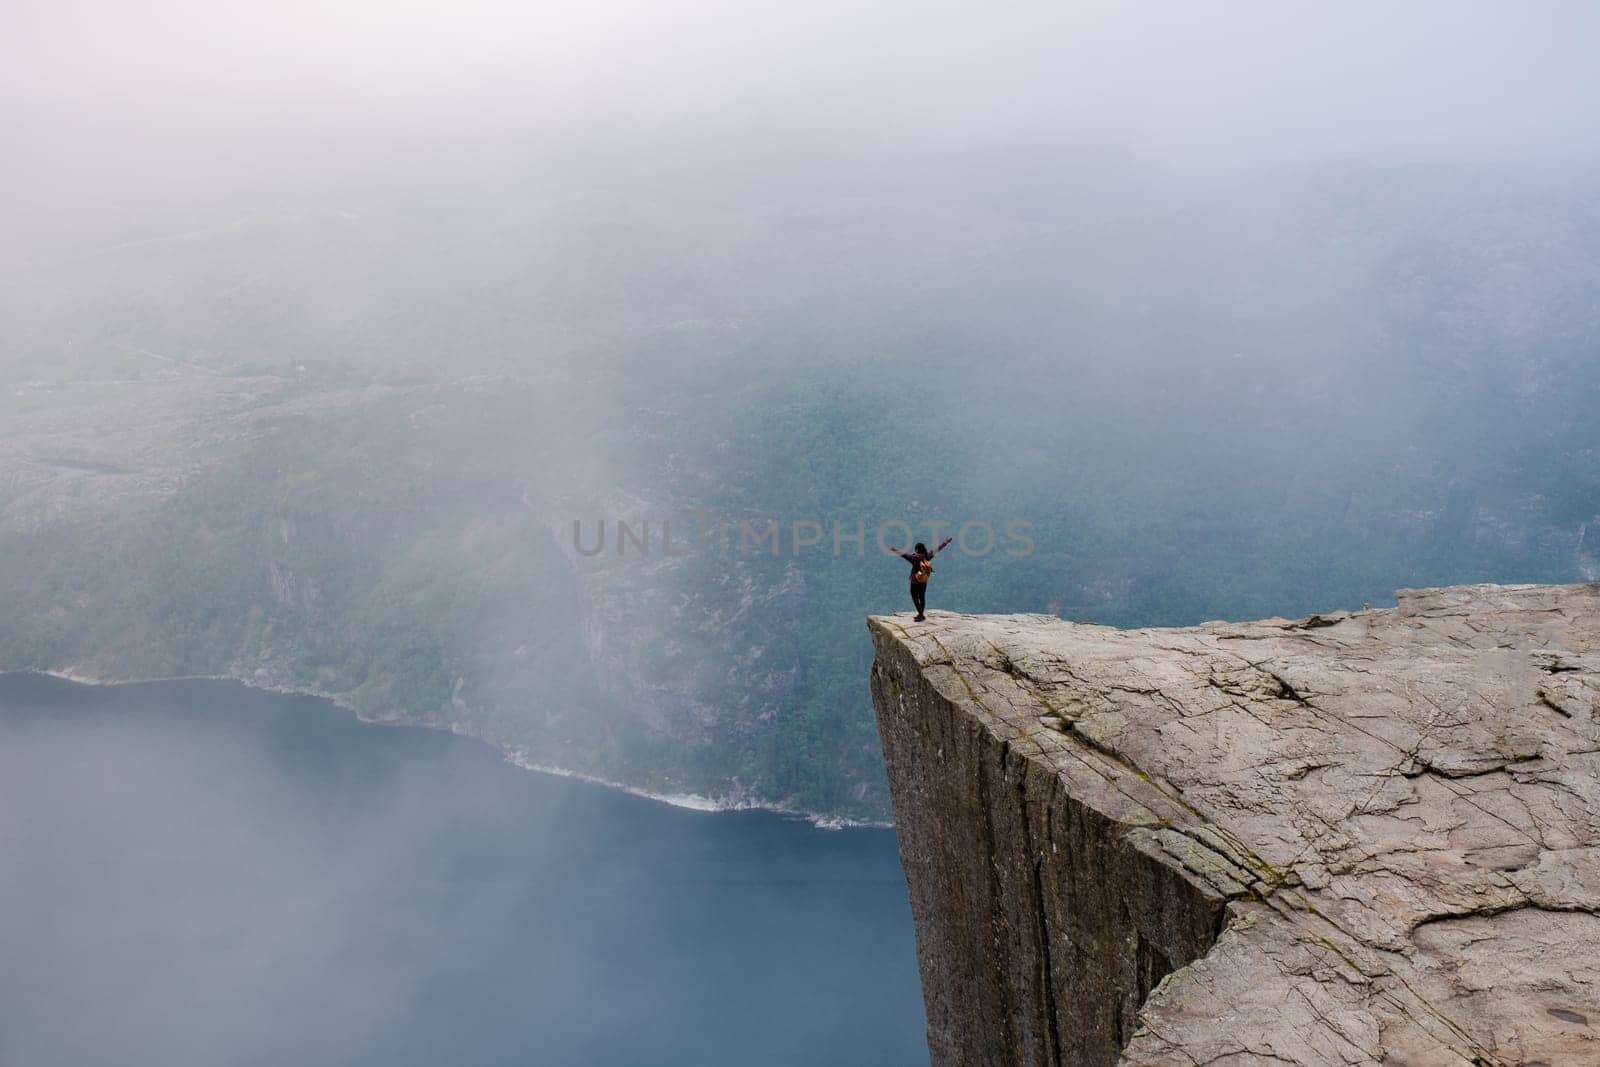 Preikestolen, Norway, A hiker stands on the edge of a cliff with arms outstretched, taking in the breathtaking view of the Norwegian fjords shrouded in mist by fokkebok